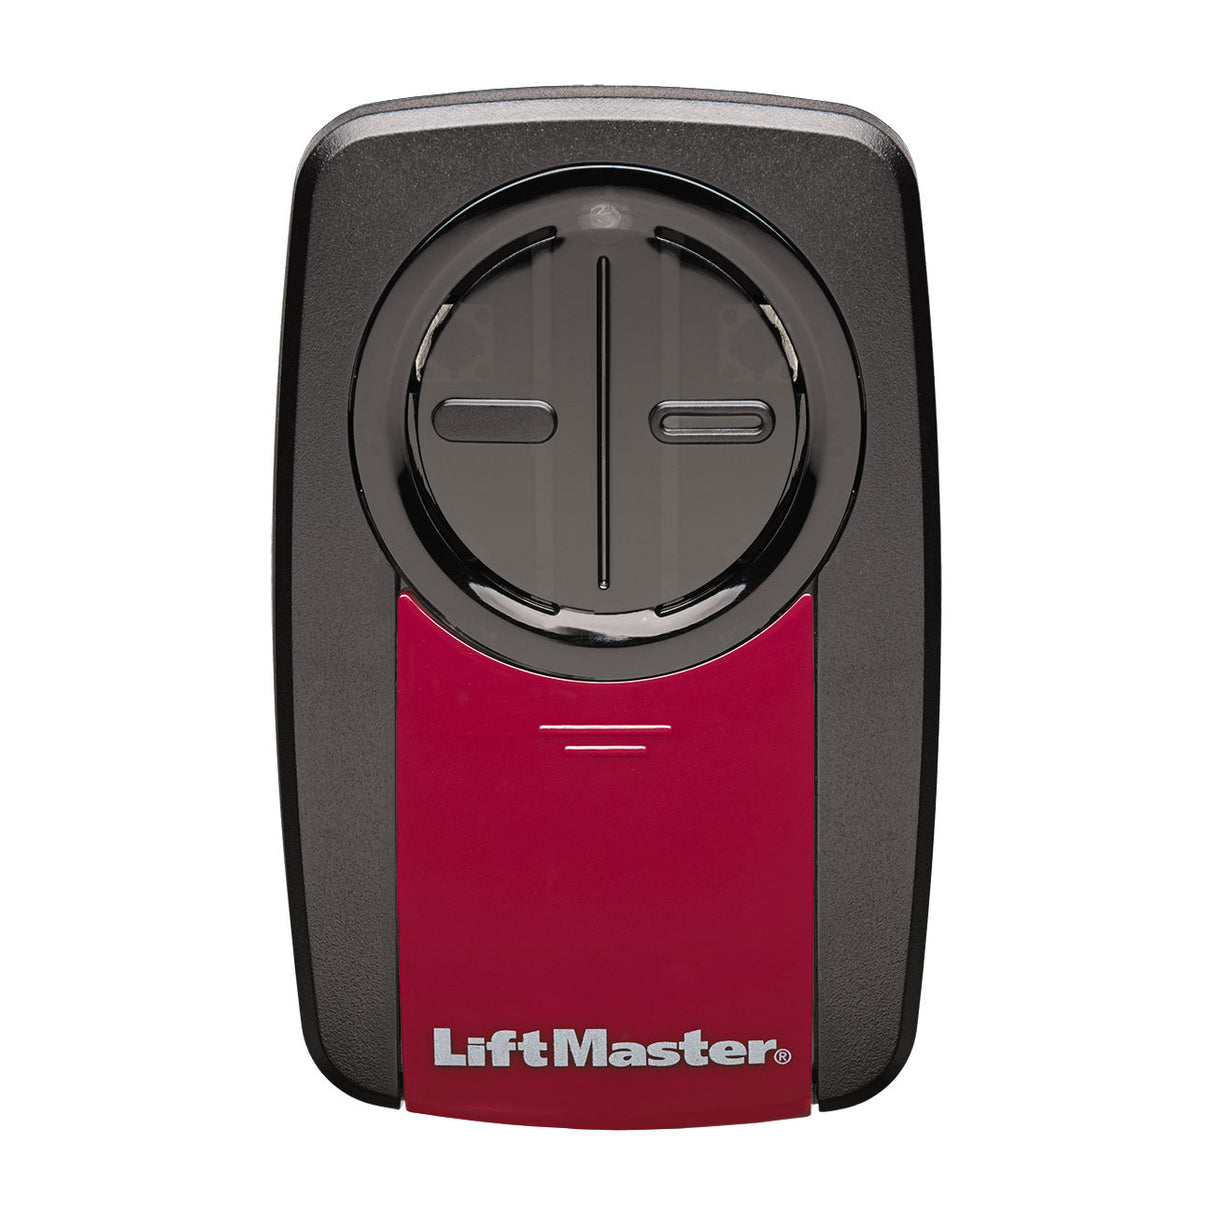 Liftmaster 380UT front view